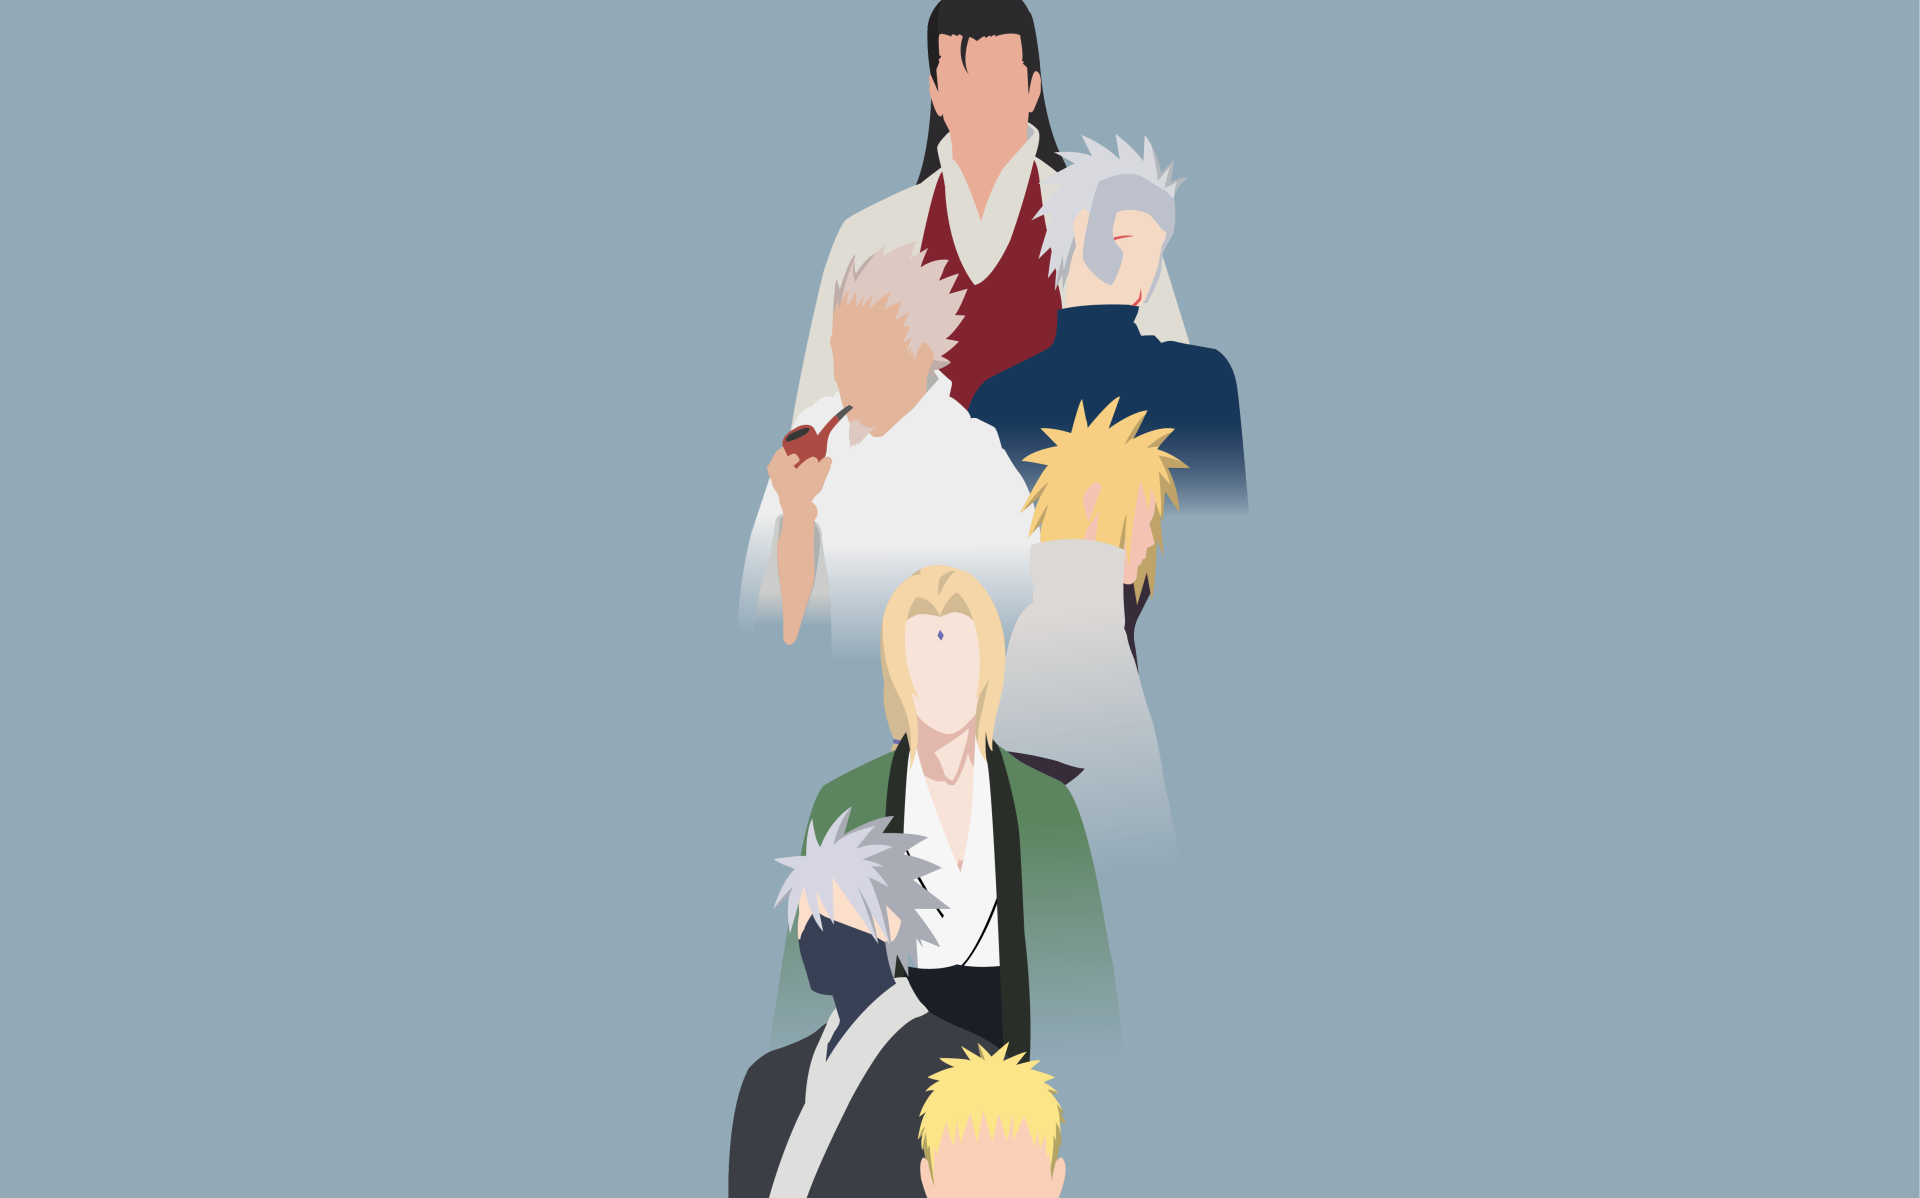 Naruto Wallpaper Background Image. View, download